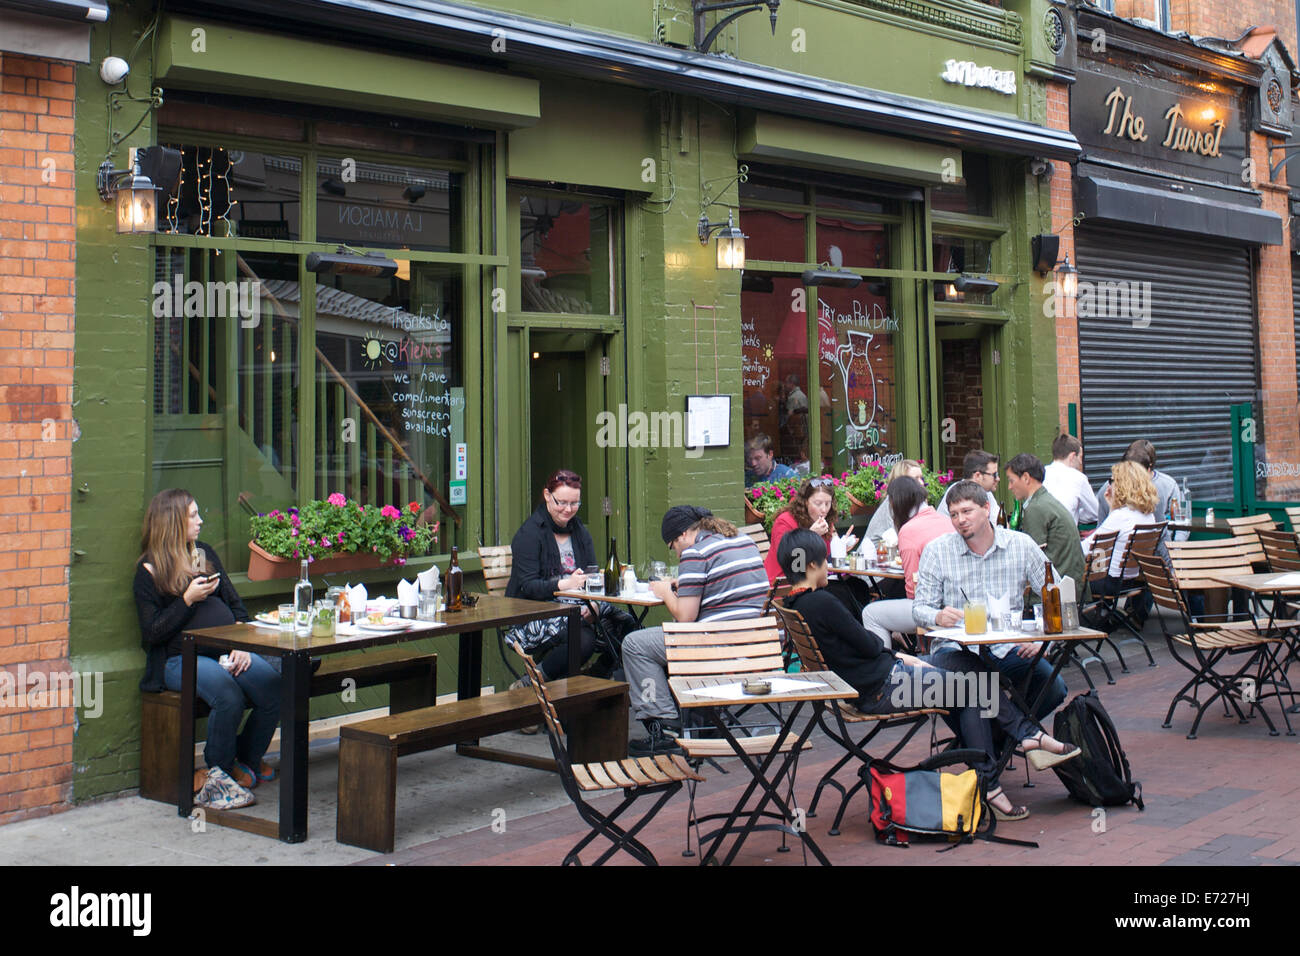 People sat outside a cafe in Dublin city, Ireland Stock Photo - Alamy